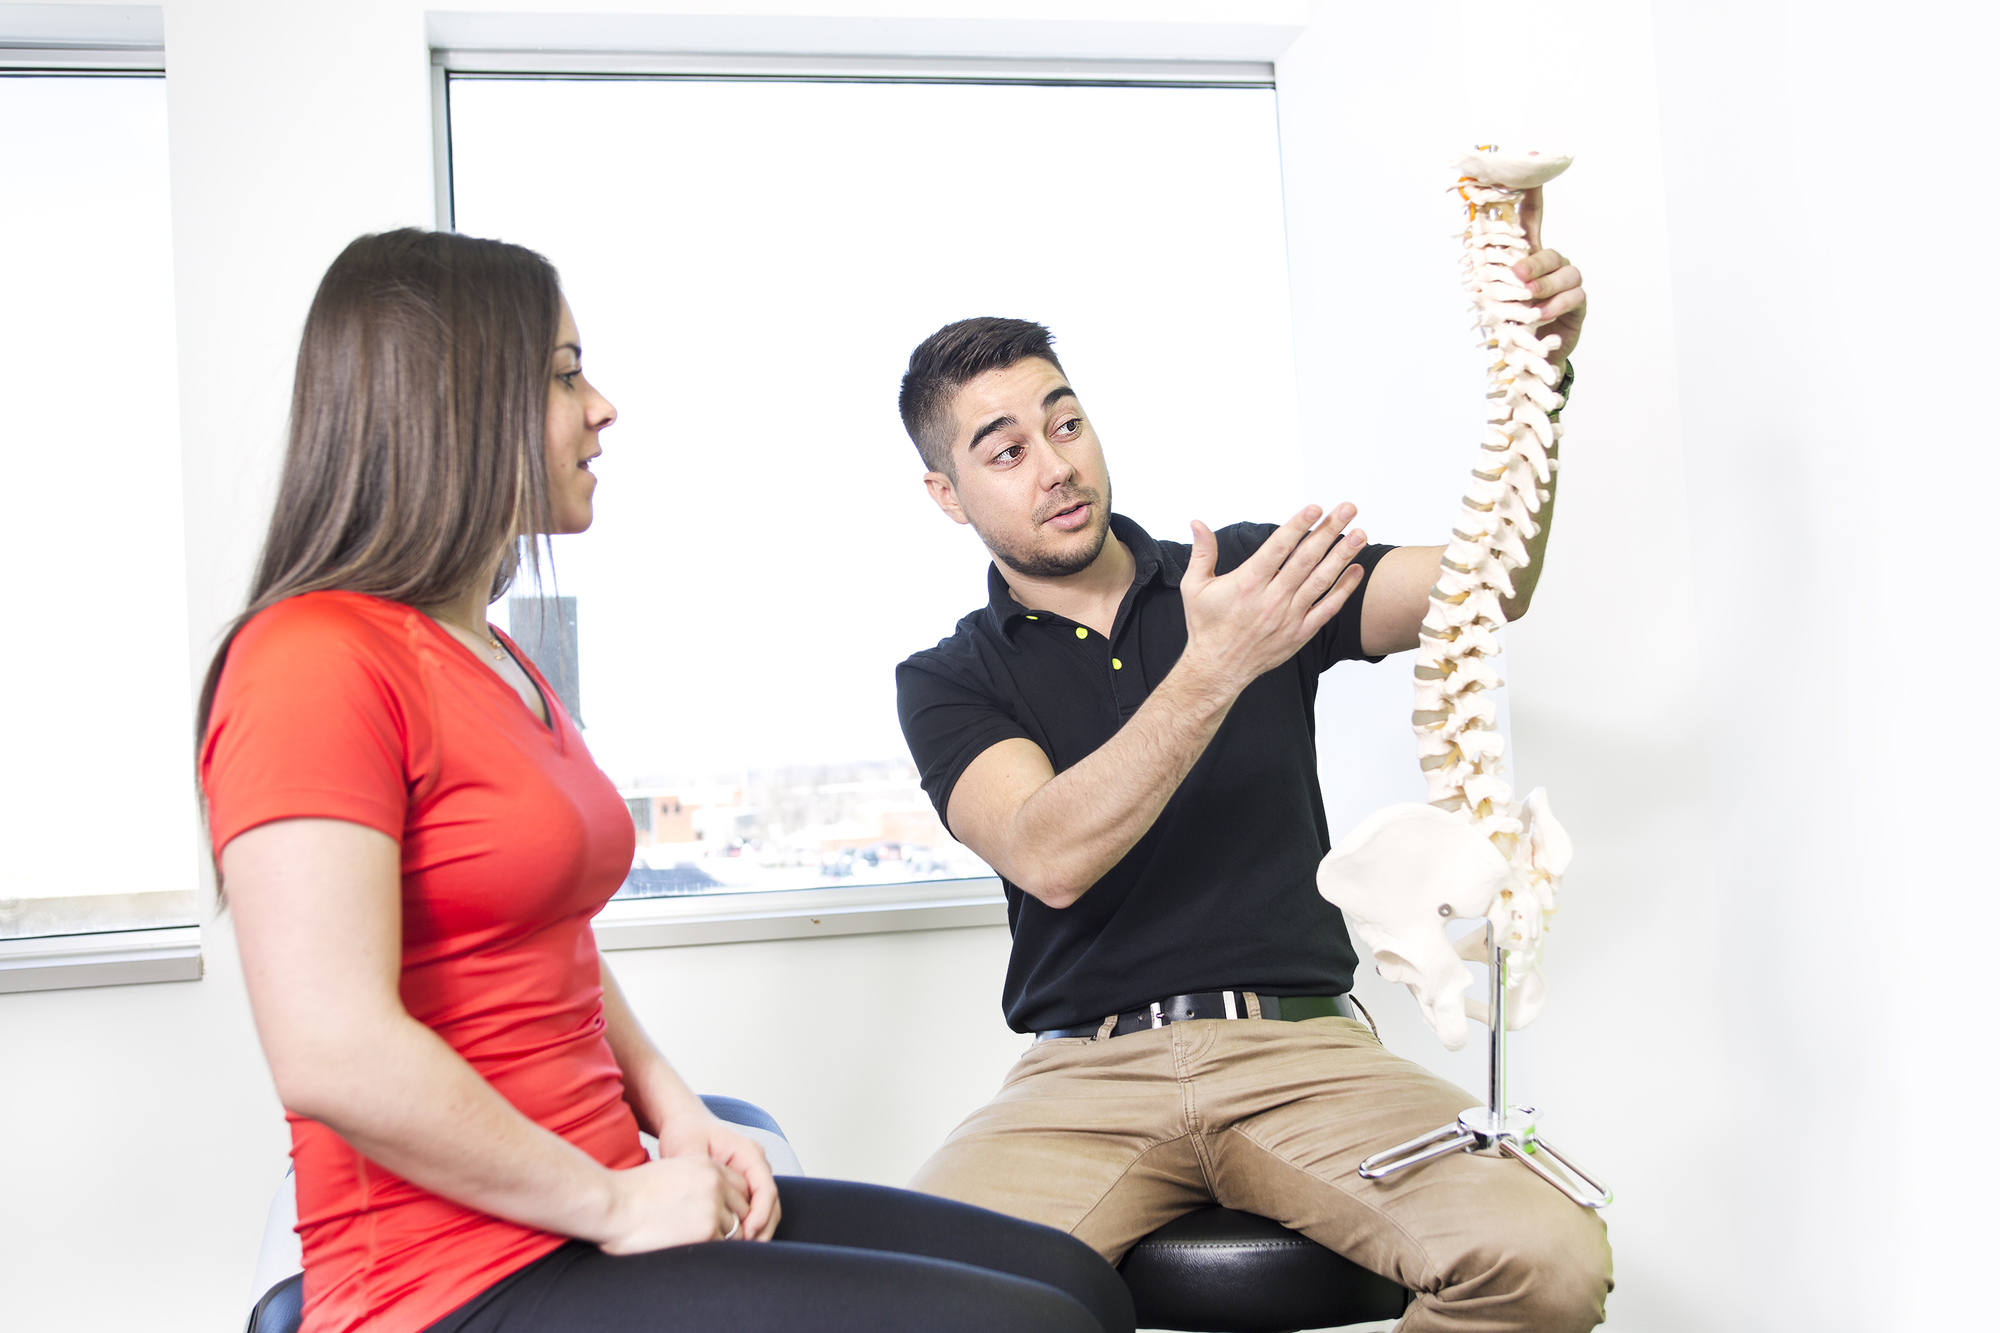 How to Know You Need to See a Chiropractor - Female Patient Describing talk to Injury Osteopath